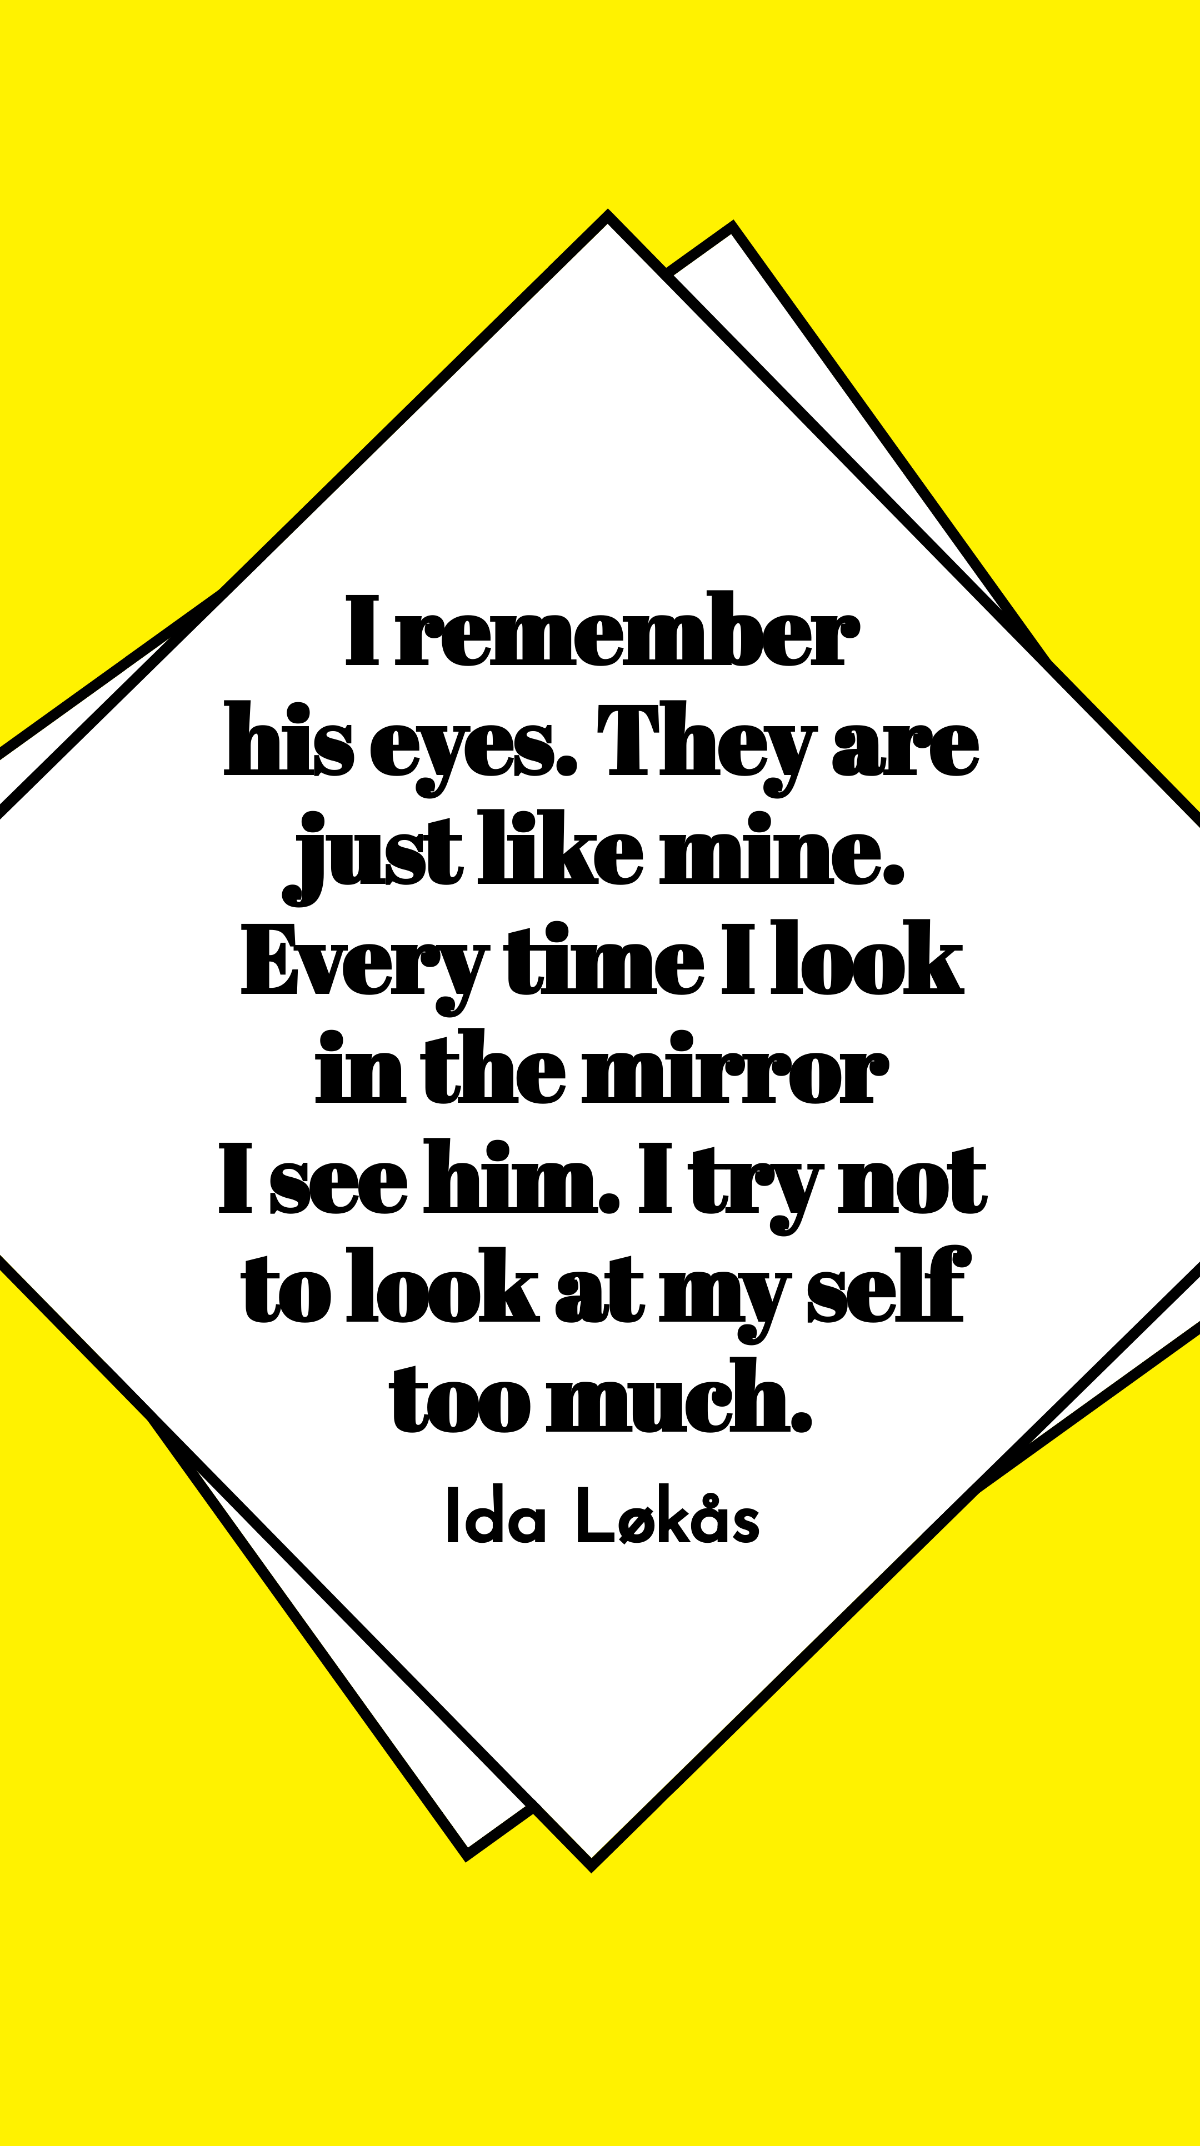 Ida Løkås - I remember his eyes. They are just like mine. Every time I look in the mirror I see him. I try not to look at my self too much.